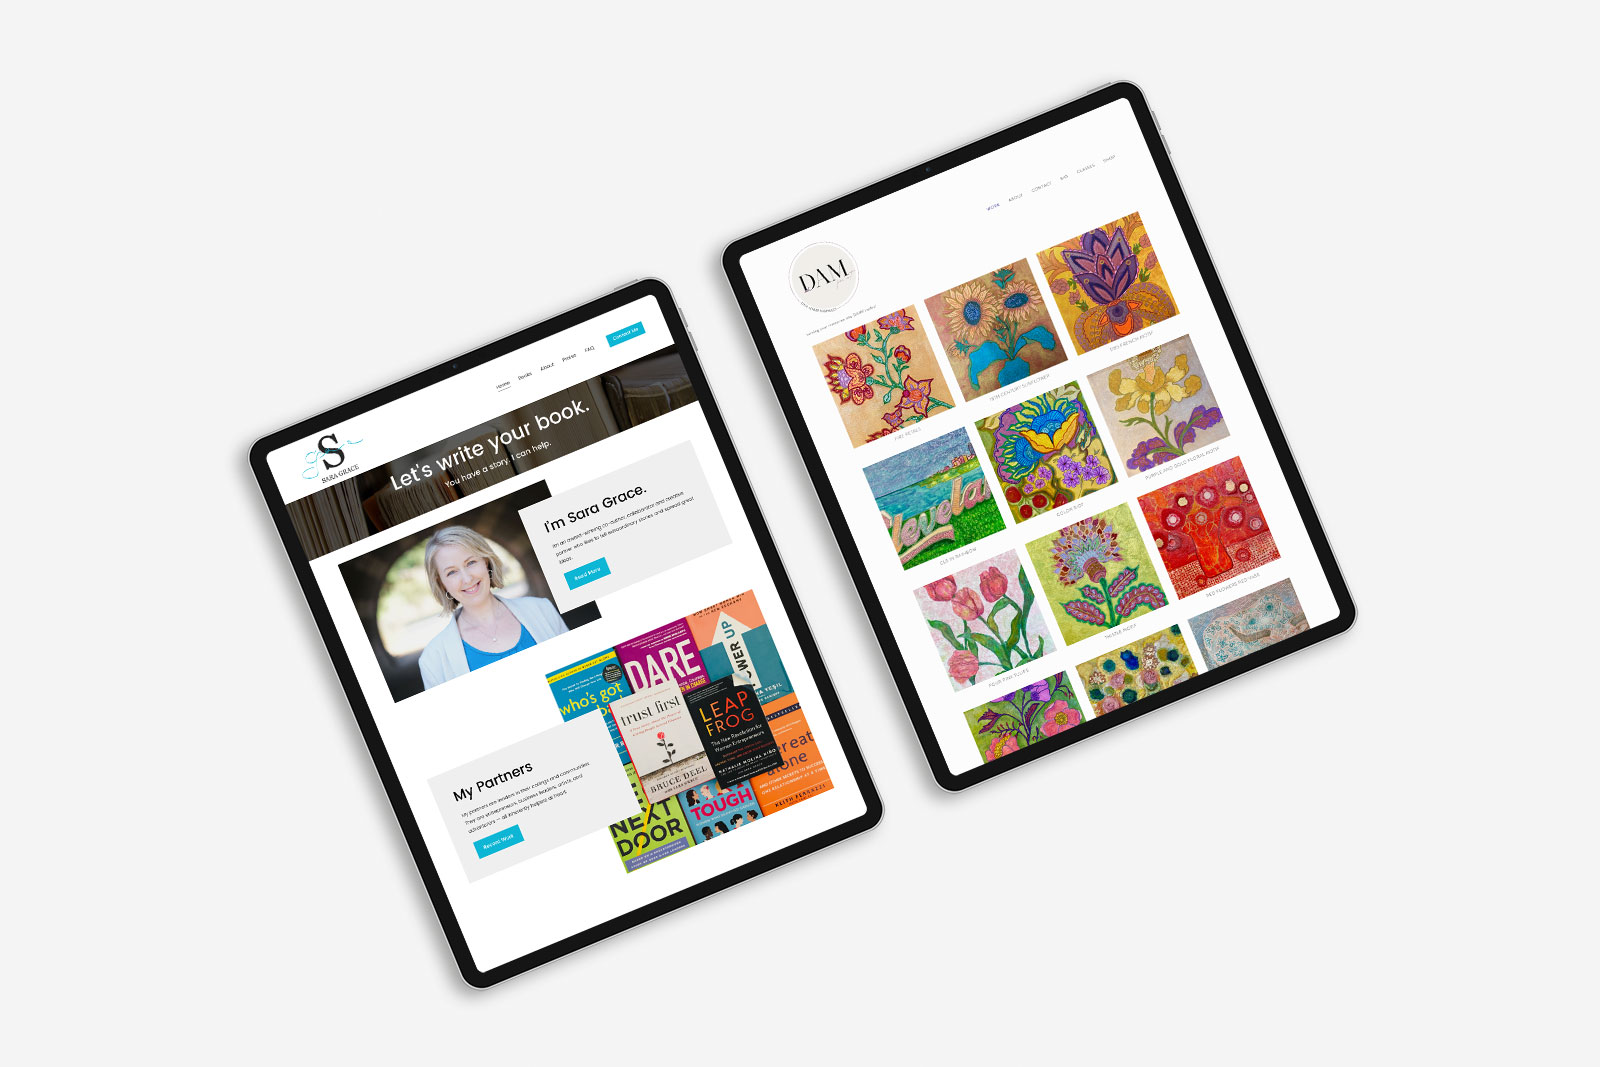 Overhead image of two tablets featuring two Squarespace website design projects